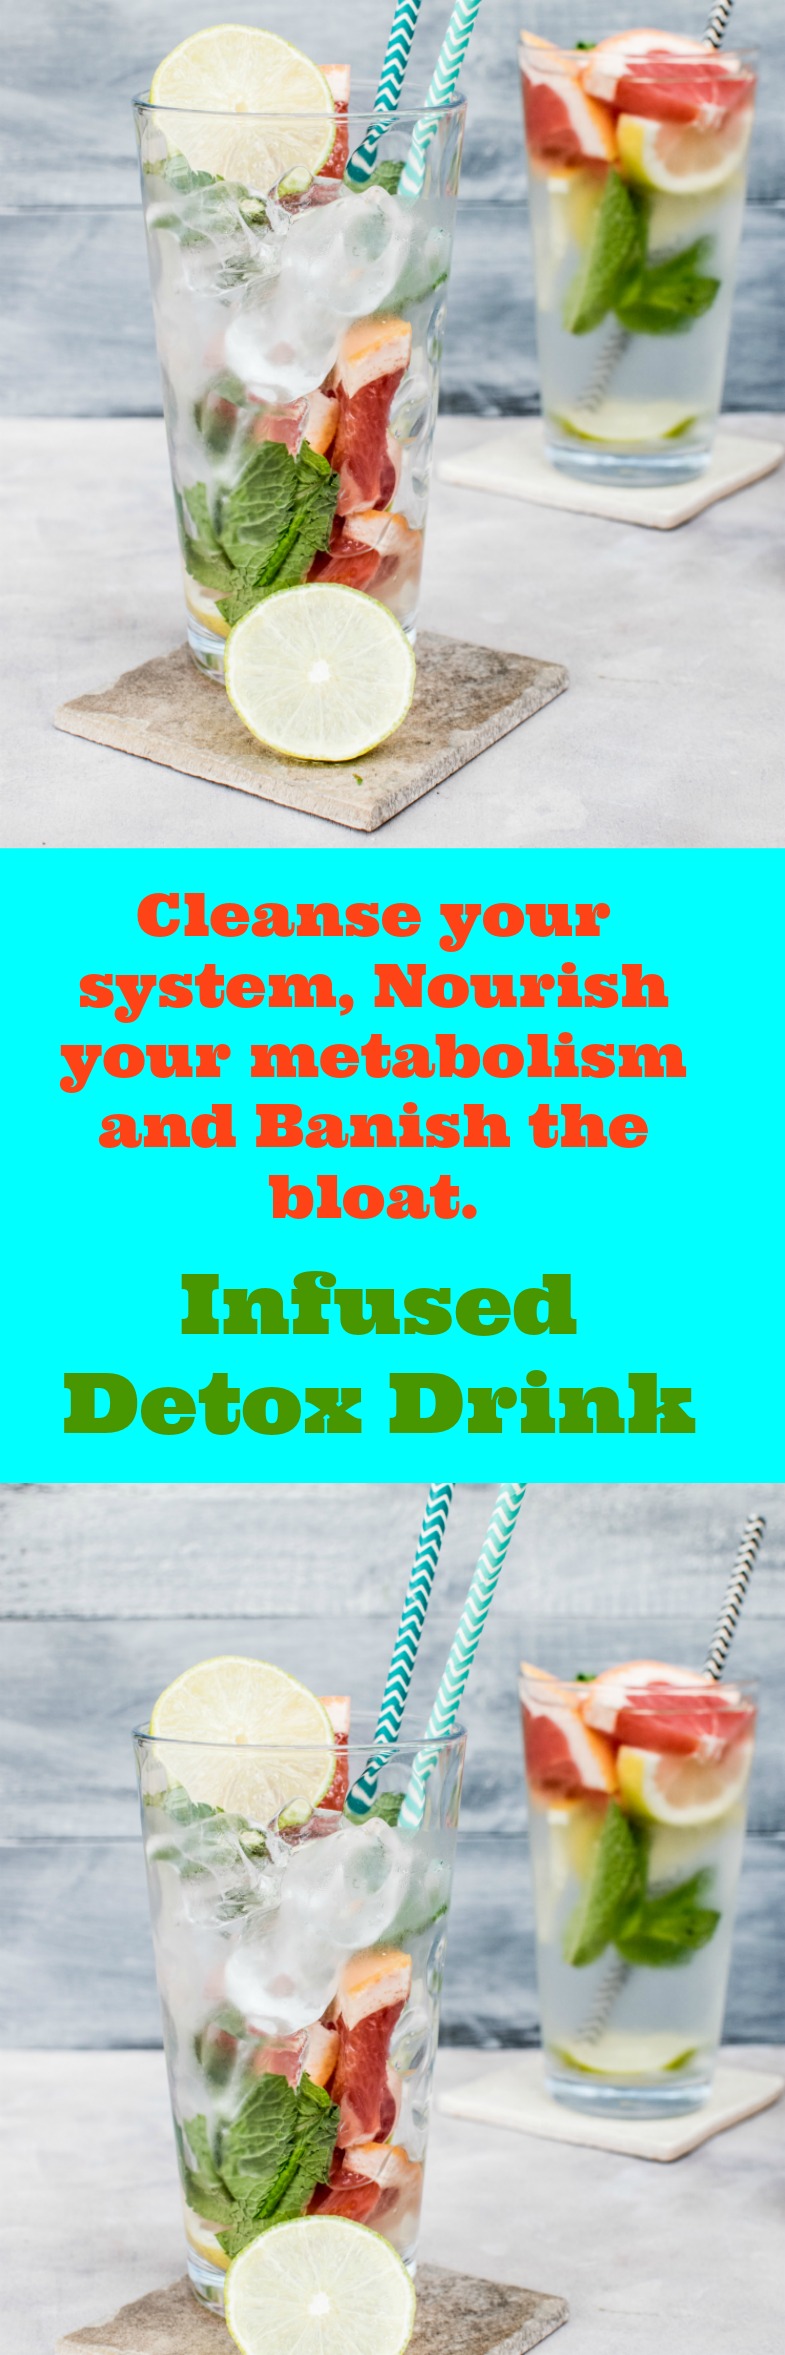 A refreshing infused detox water to cleanse your system, nourish your metabolism and banish the bloat. A fat burning drinks to help you with weight loss. Healthy living has never tasted so good!